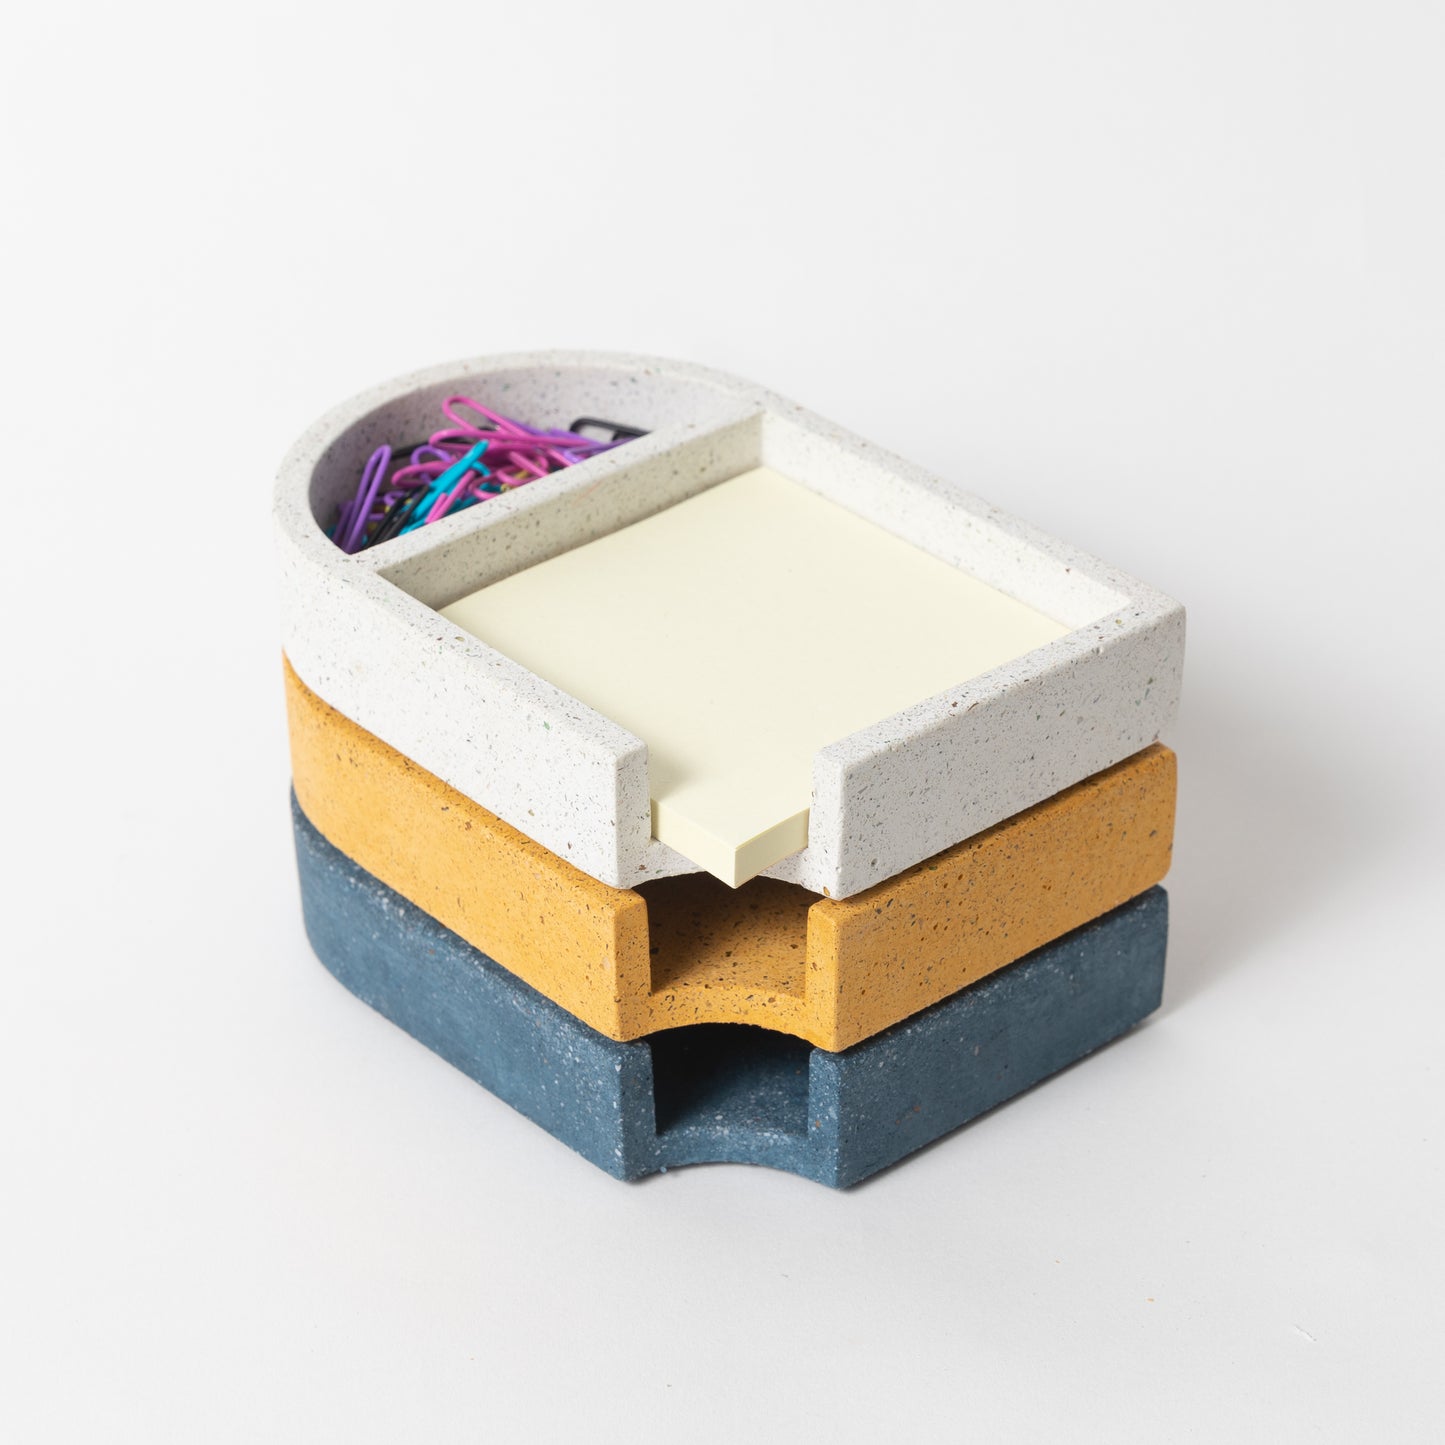 Concrete sticki note holder in various colors.